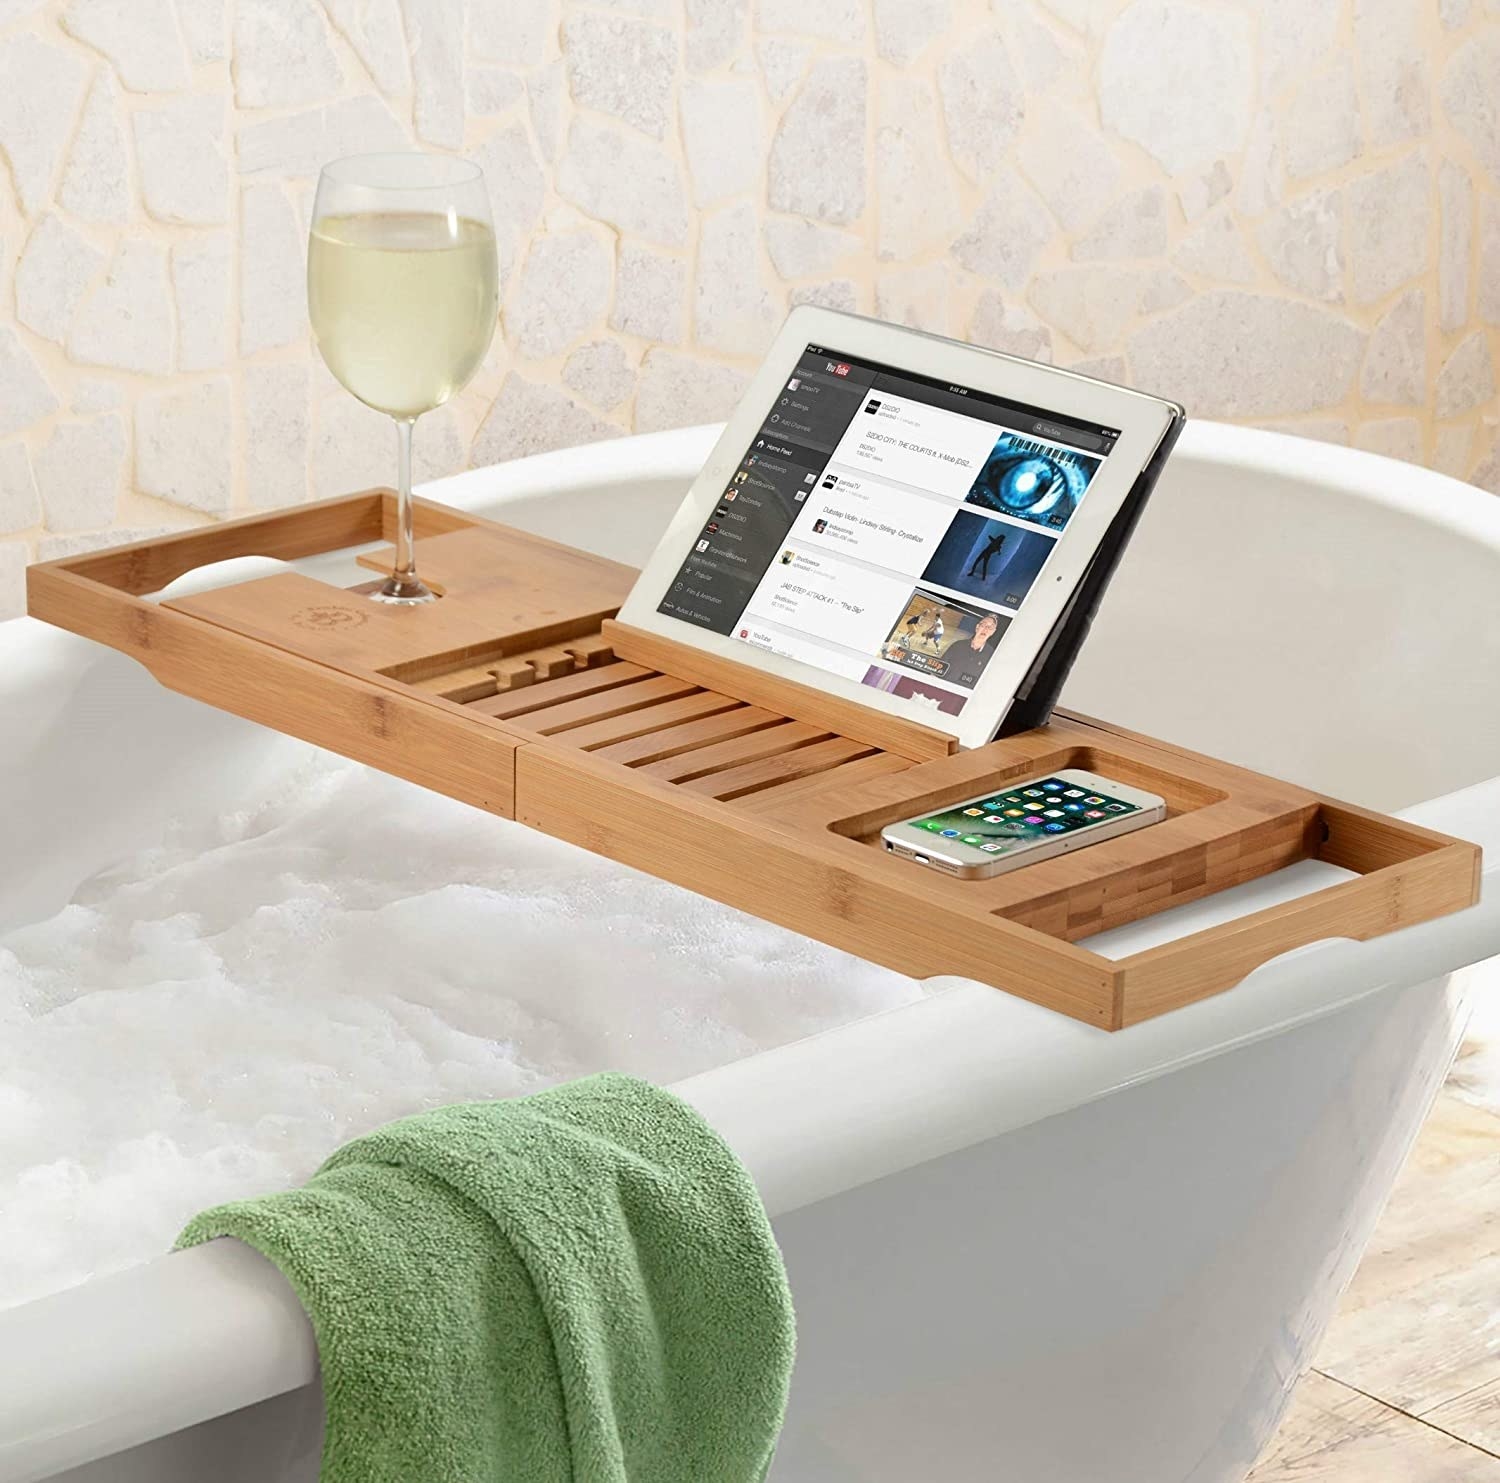 caddy on a tub with tablet, phone, and a glass of wine